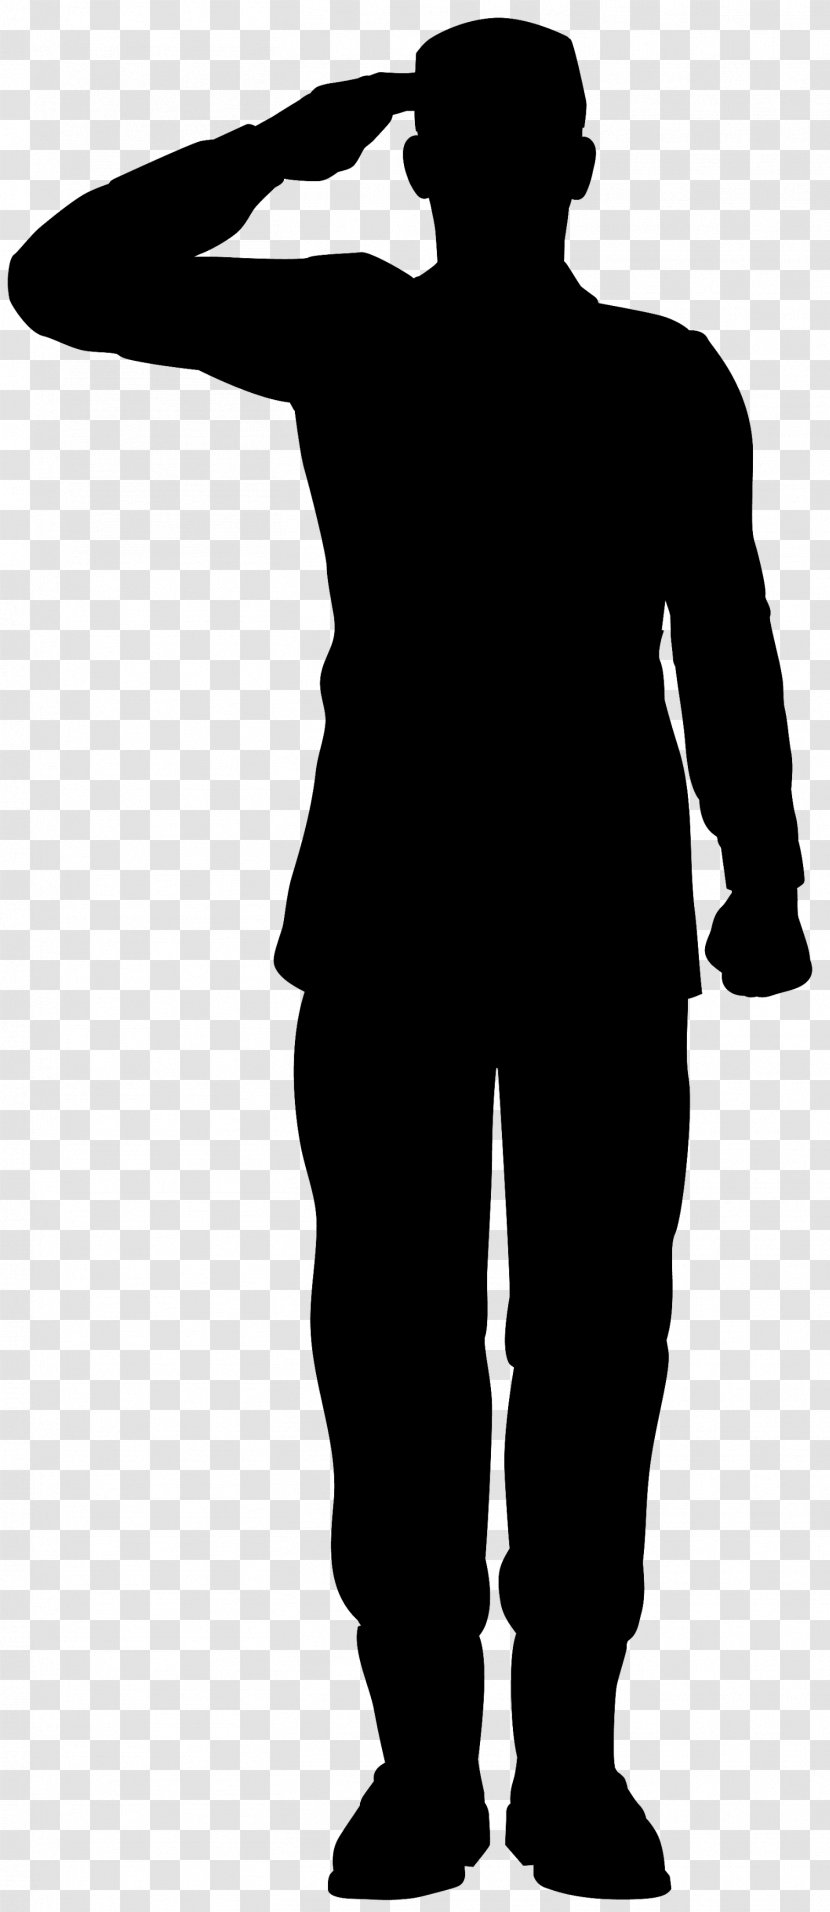 Soldier Silhouette - Human - Style Gesture Transparent PNG